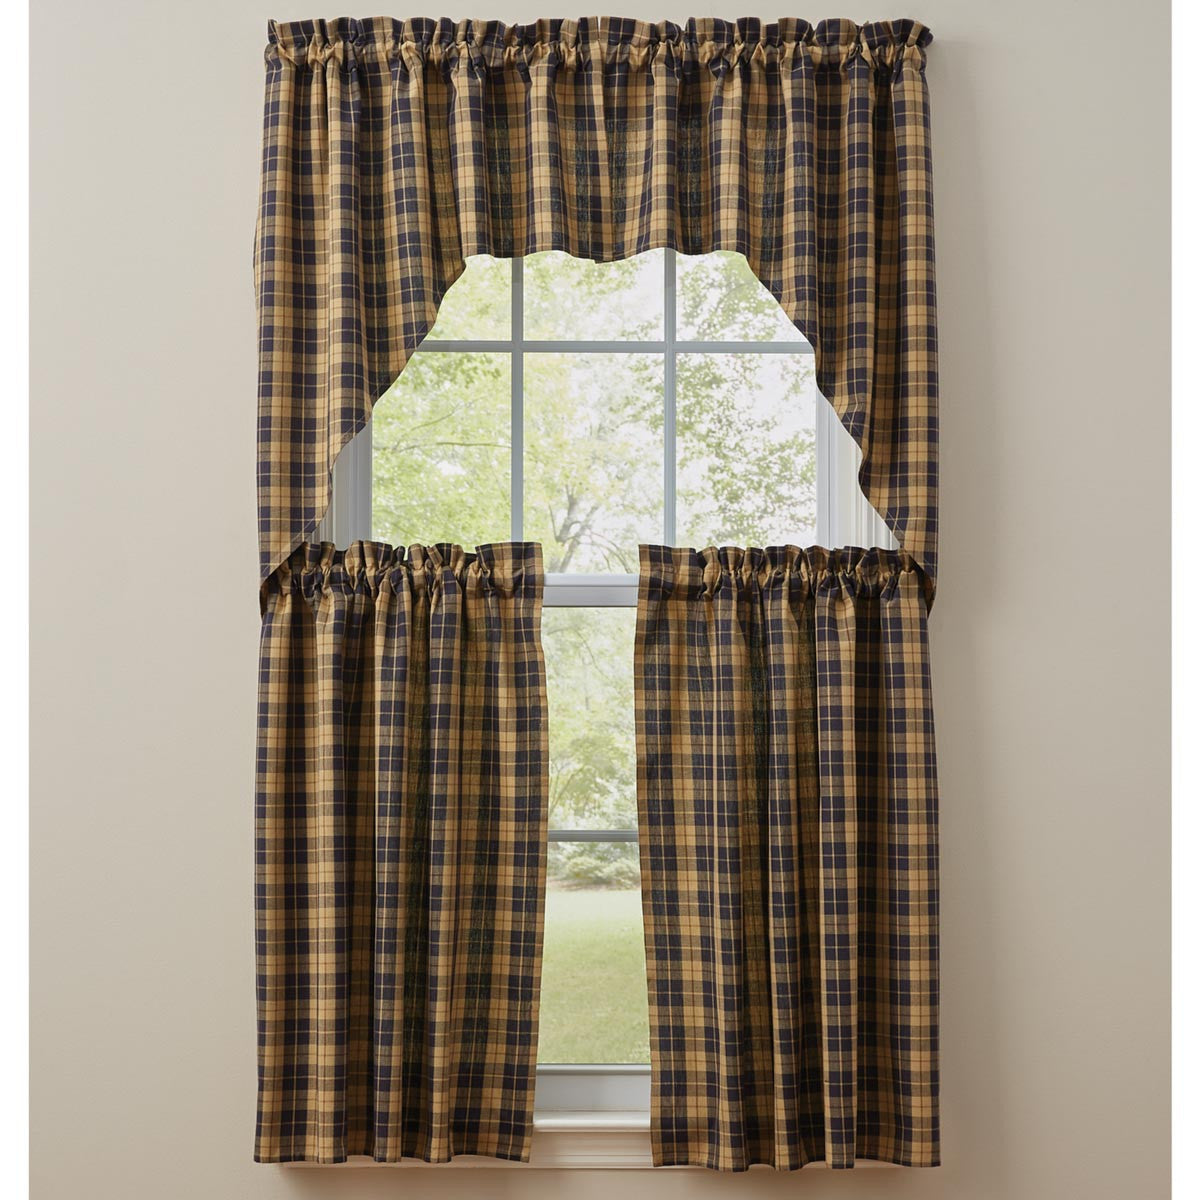 Set of 2 Pittsfield Window Curtain Swag - Park Designs